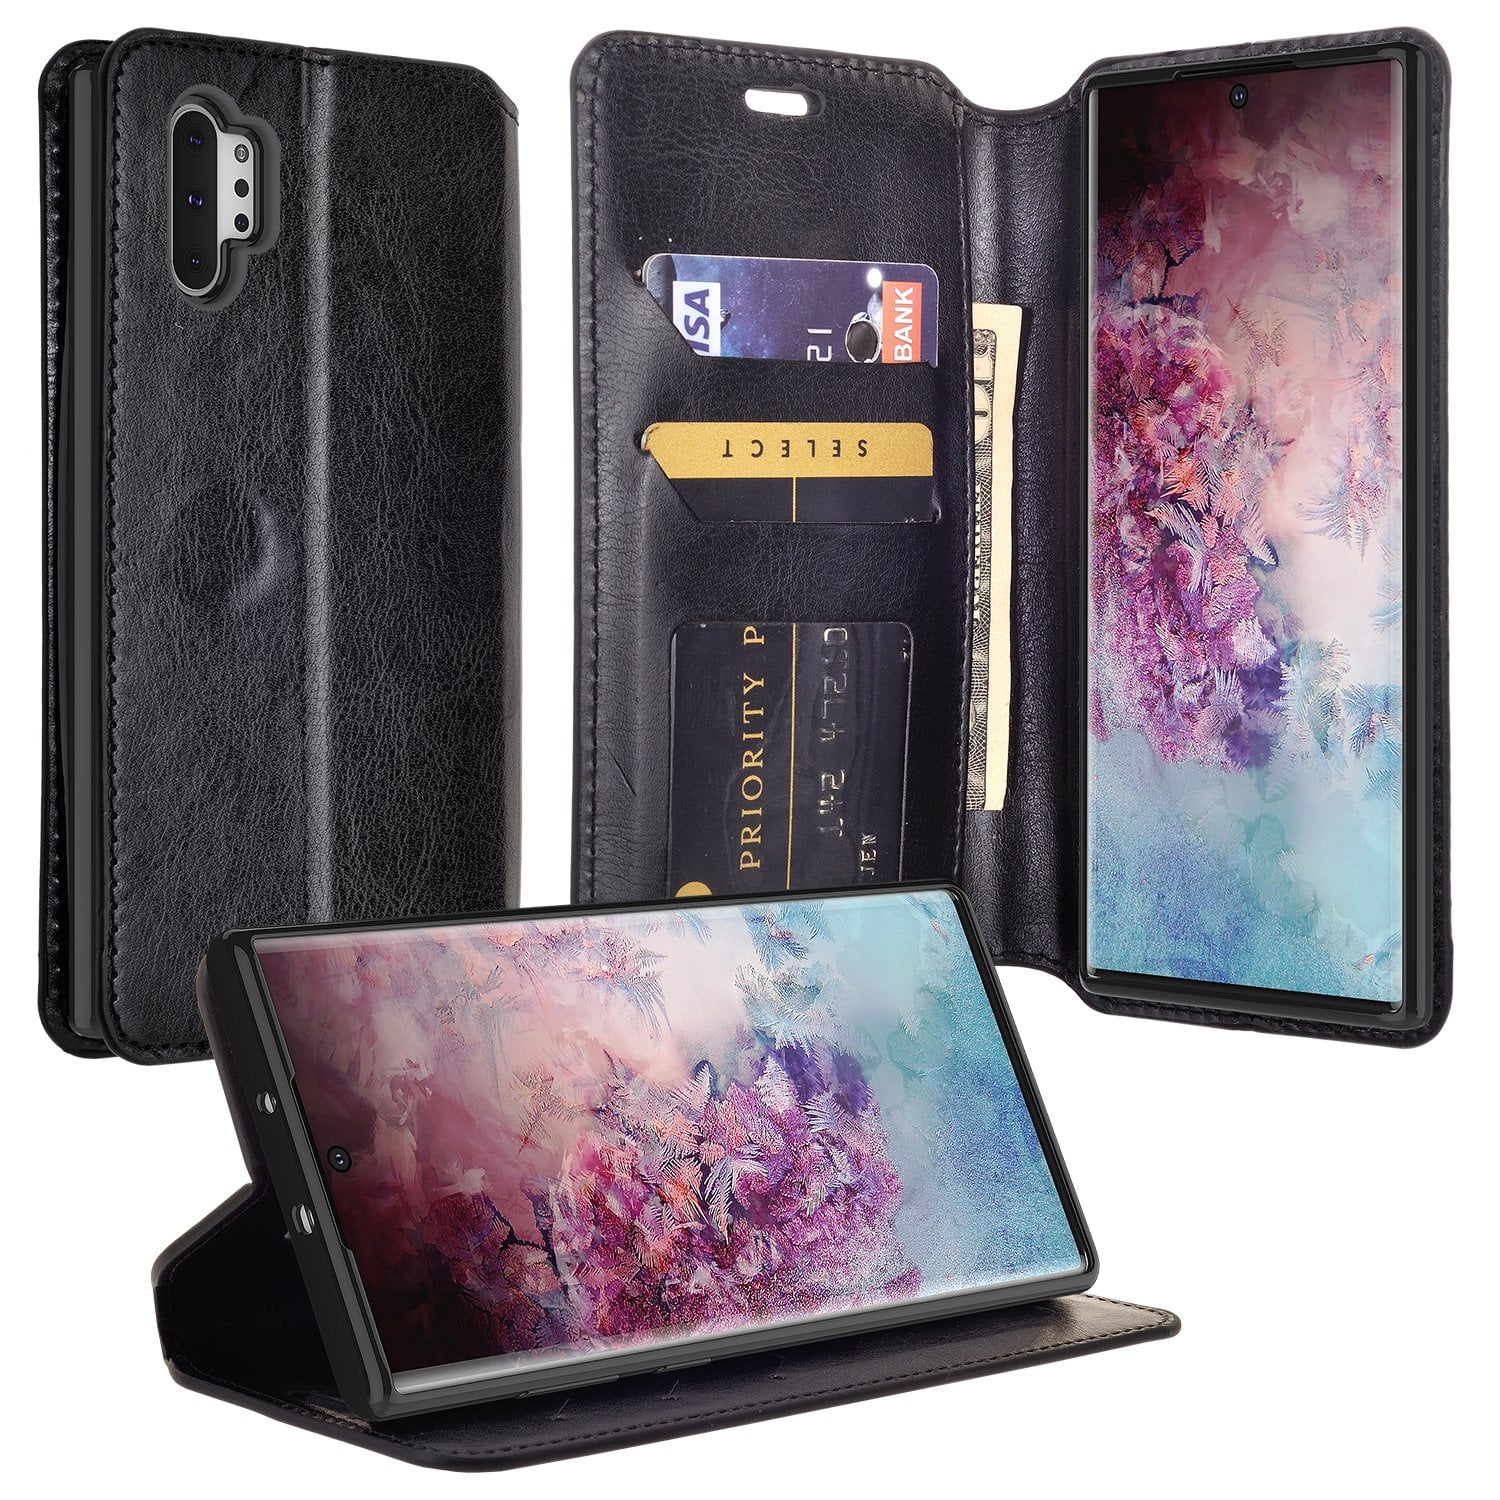 Card Holders Kickstand Luxury Black Wallet Cover for Samsung Galaxy Note 10 Plus Leather Flip Case Fit for Samsung Galaxy Note 10 Plus